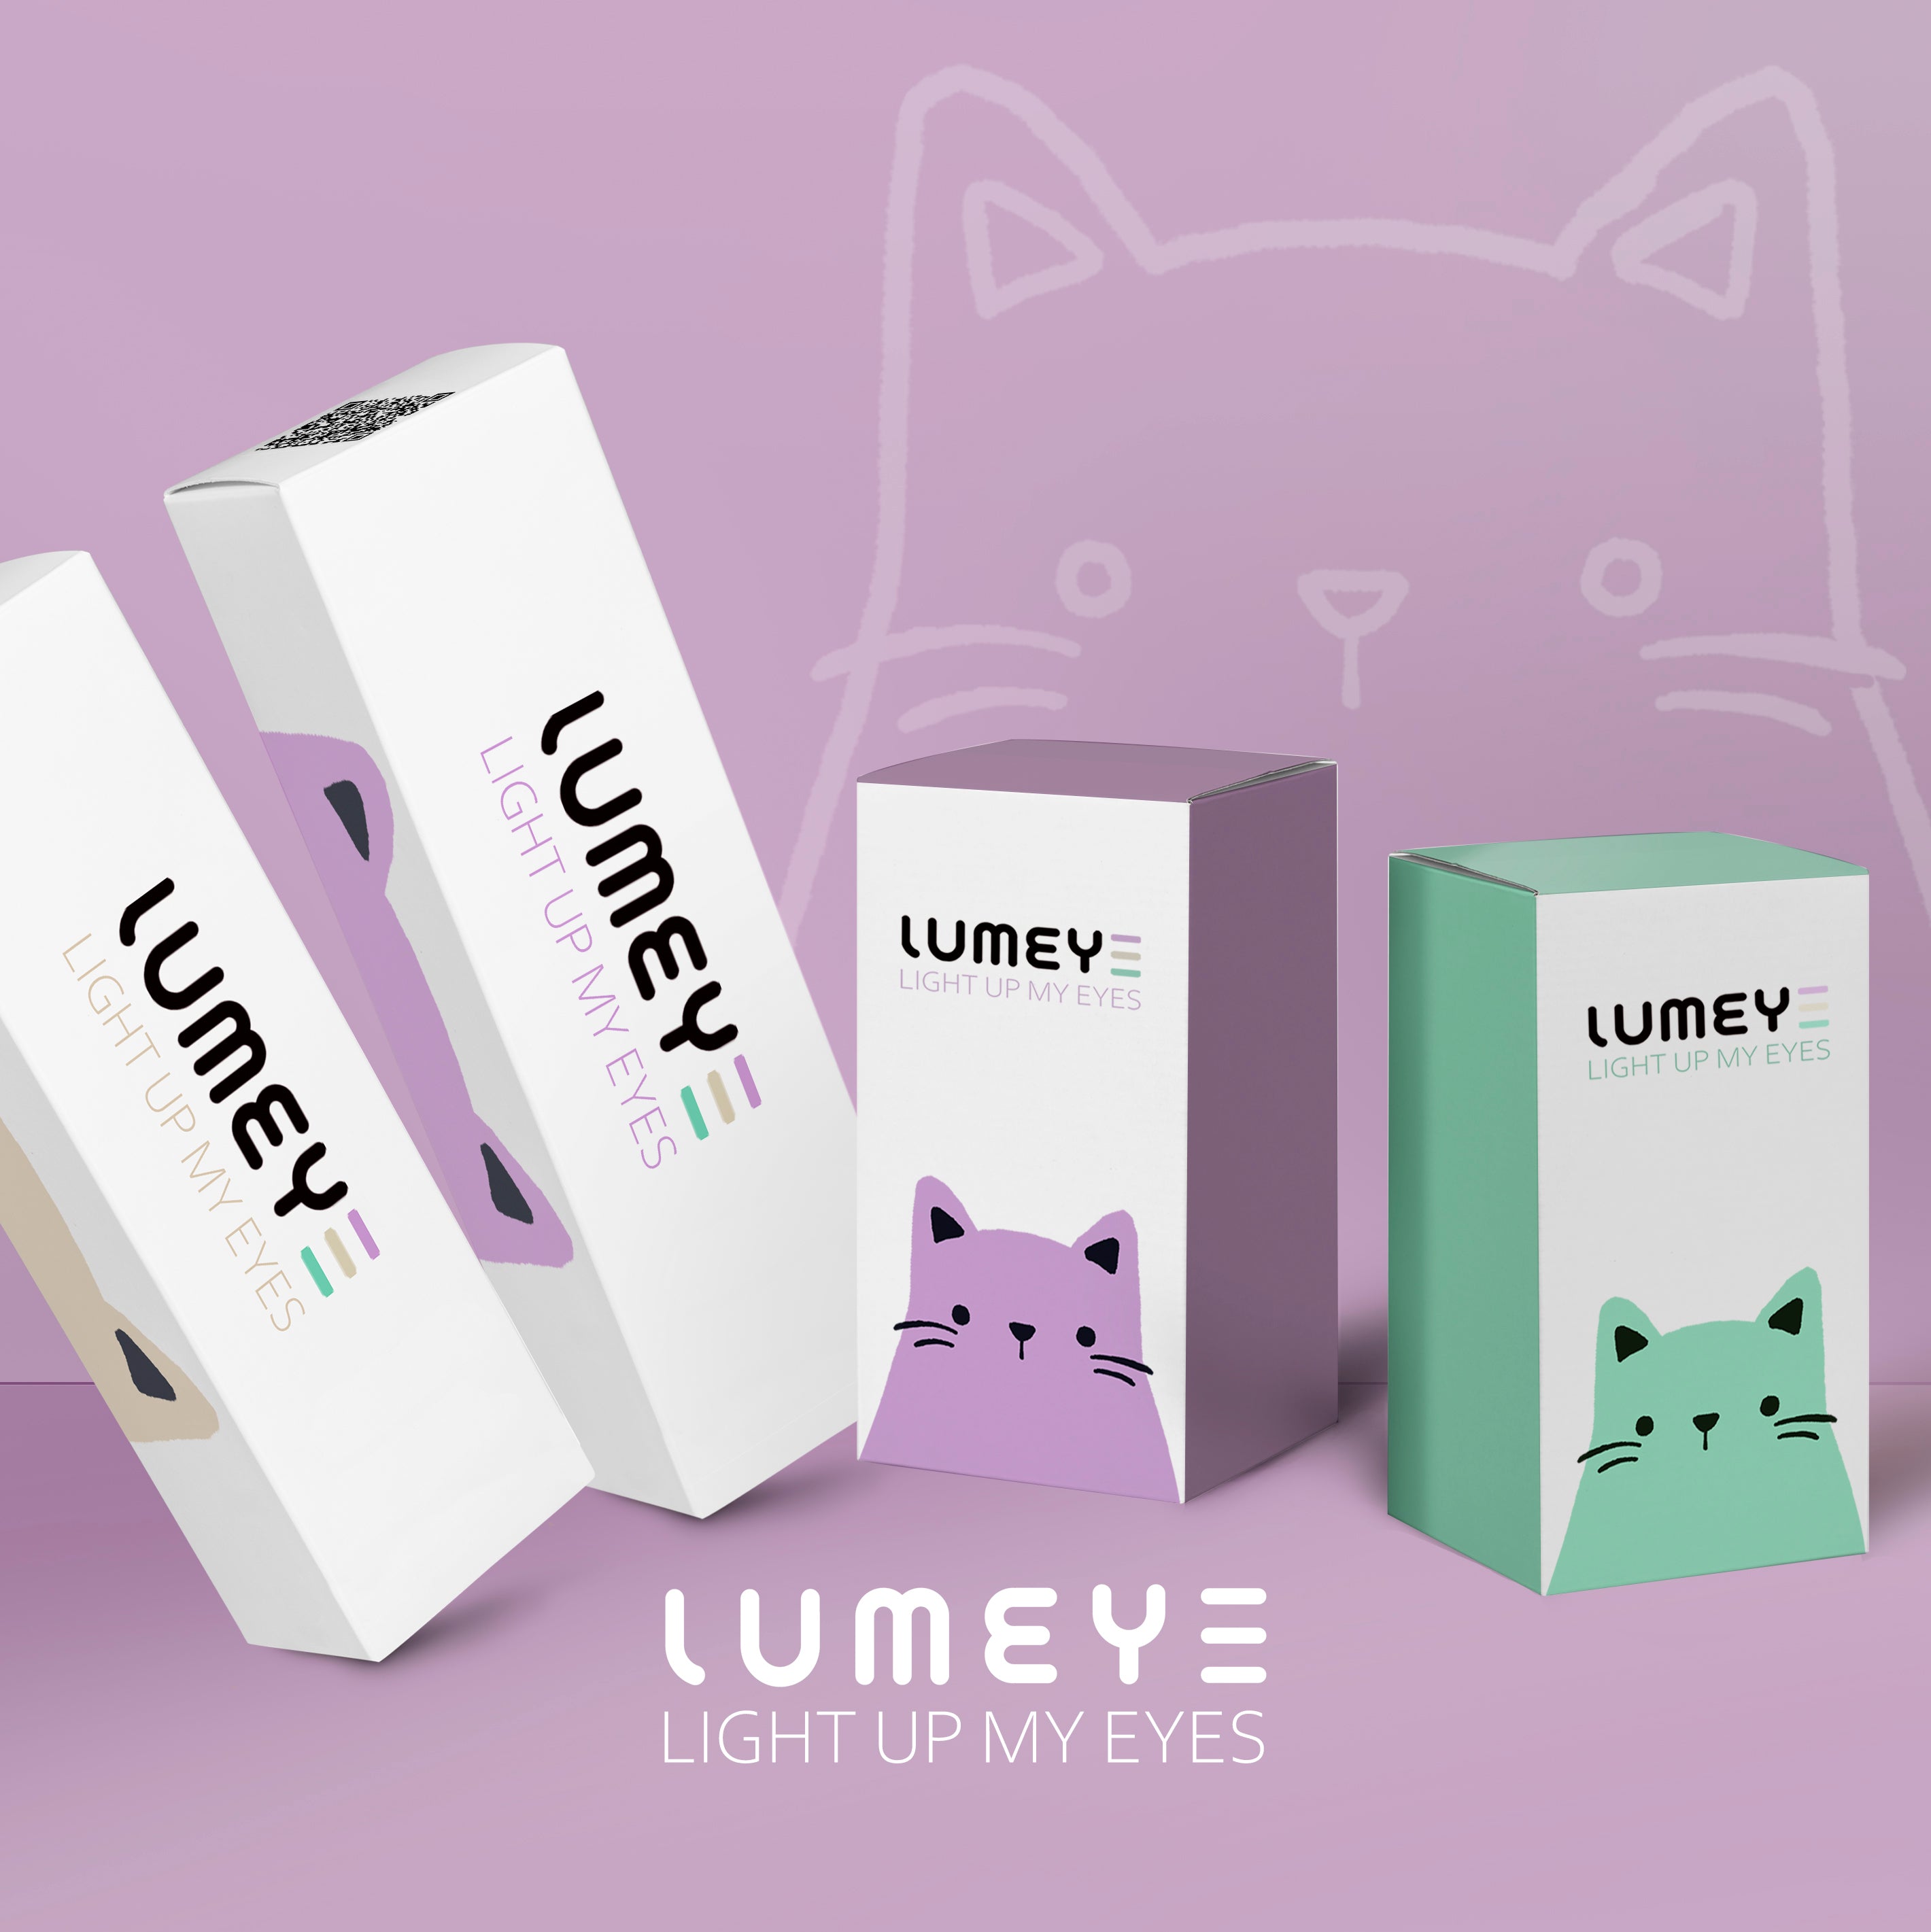 Best COLORED CONTACTS - LUMEYE Cat Eye White Colored Contact Lenses - LUMEYE